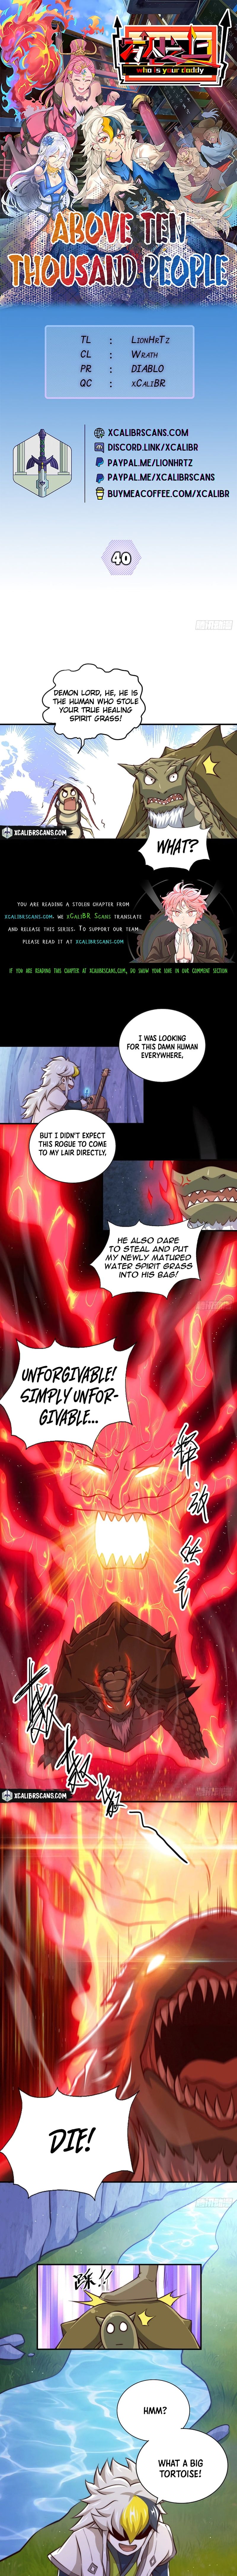 Beyond Myriad Peoples Chapter 40 Page 1